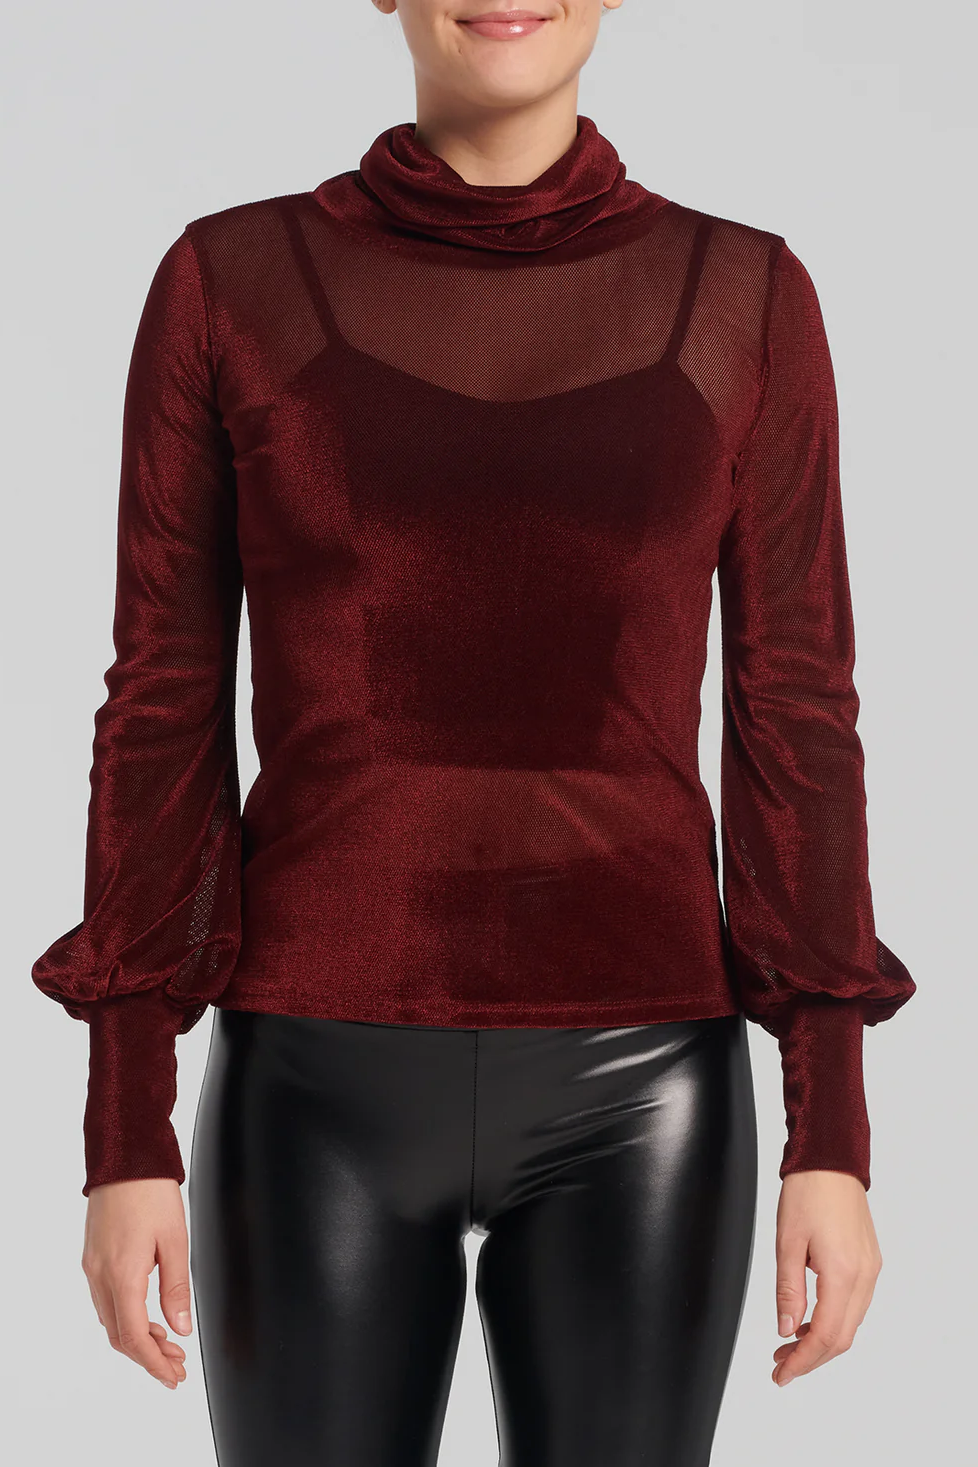 Woman wearing the Lavenza Top by Kollontai in Bordeaux with faux leather pants